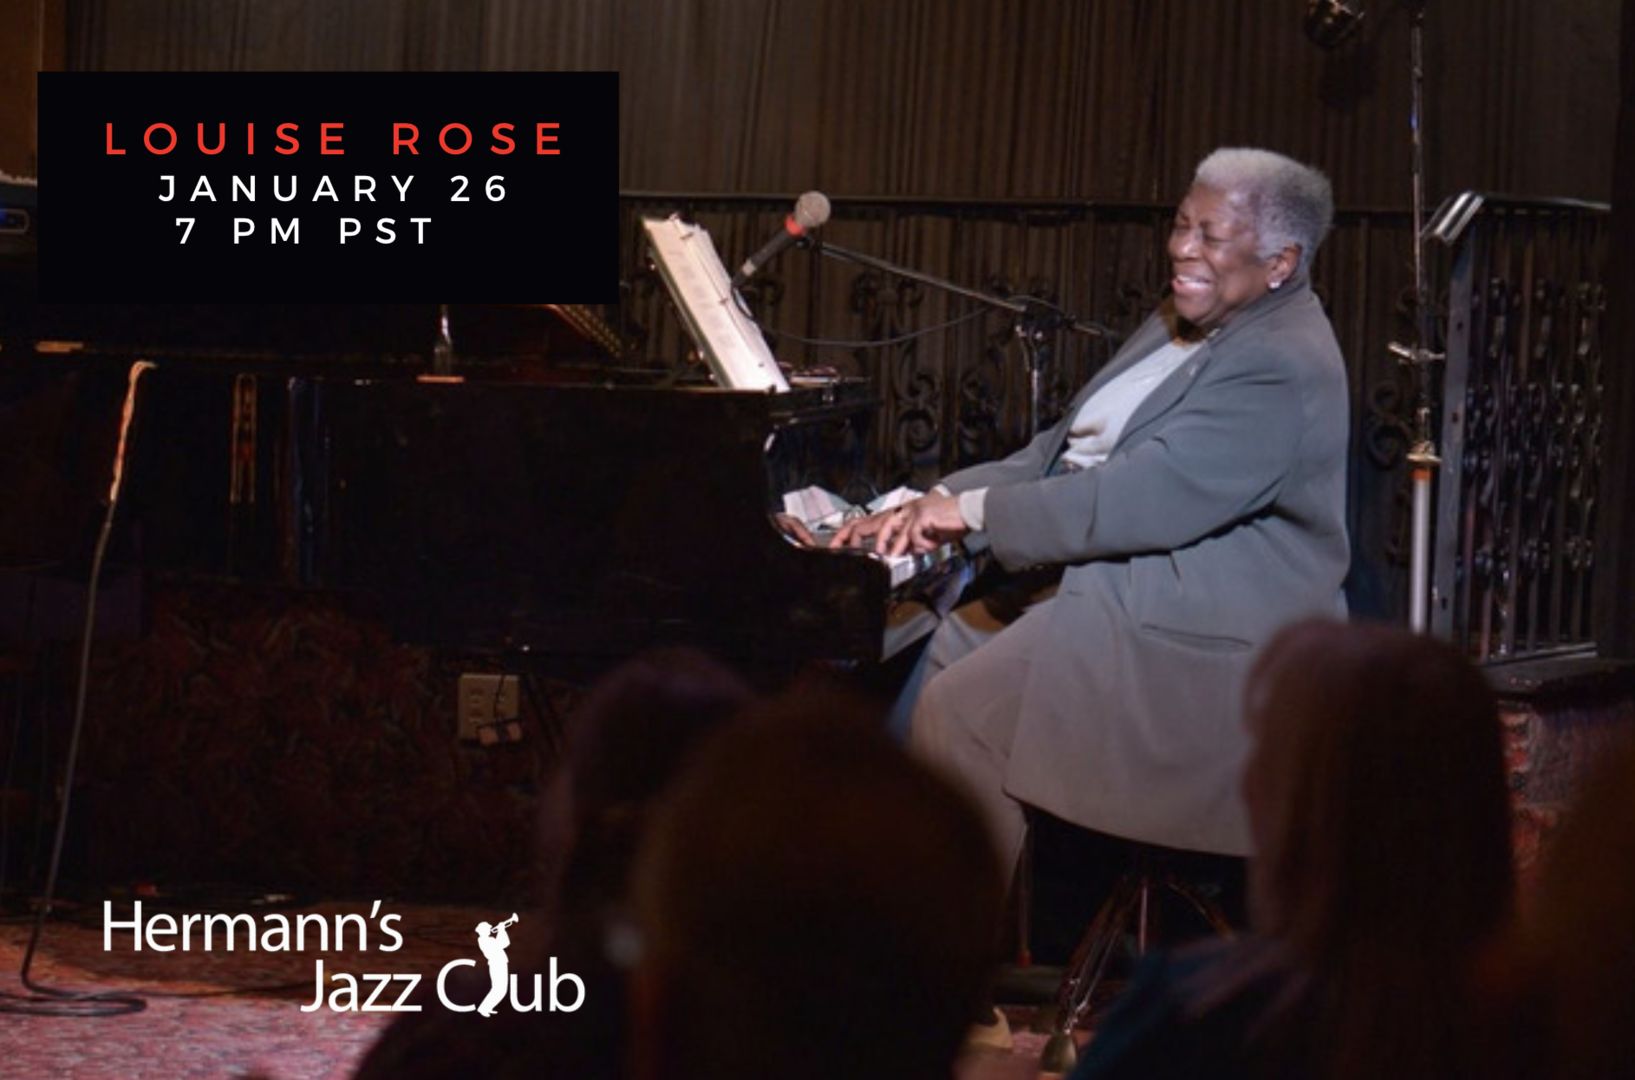 Louise Rose at Hermann's Jazz Club LIVESTREAM and LIVE AUDIENCE, Victoria, British Columbia, Canada